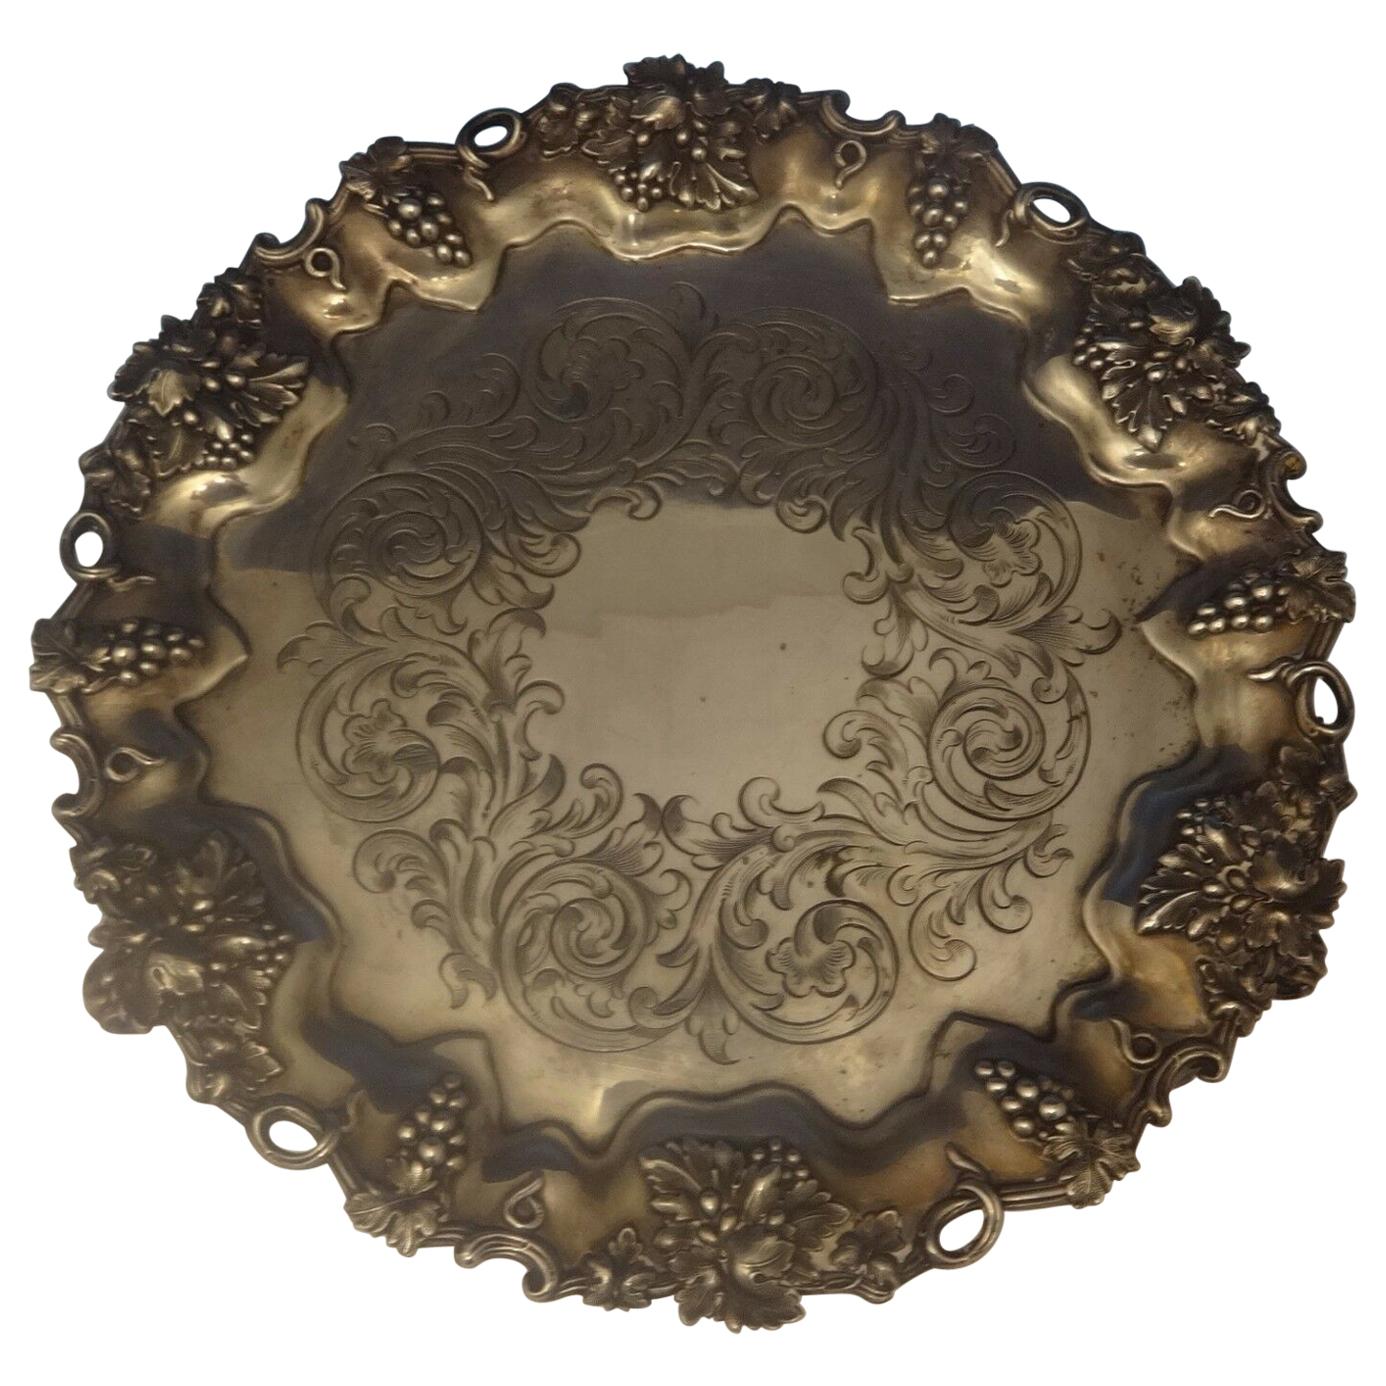 Hw & Co. English Sterling Silver Salver Tray with Grapes Footed, circa 1849